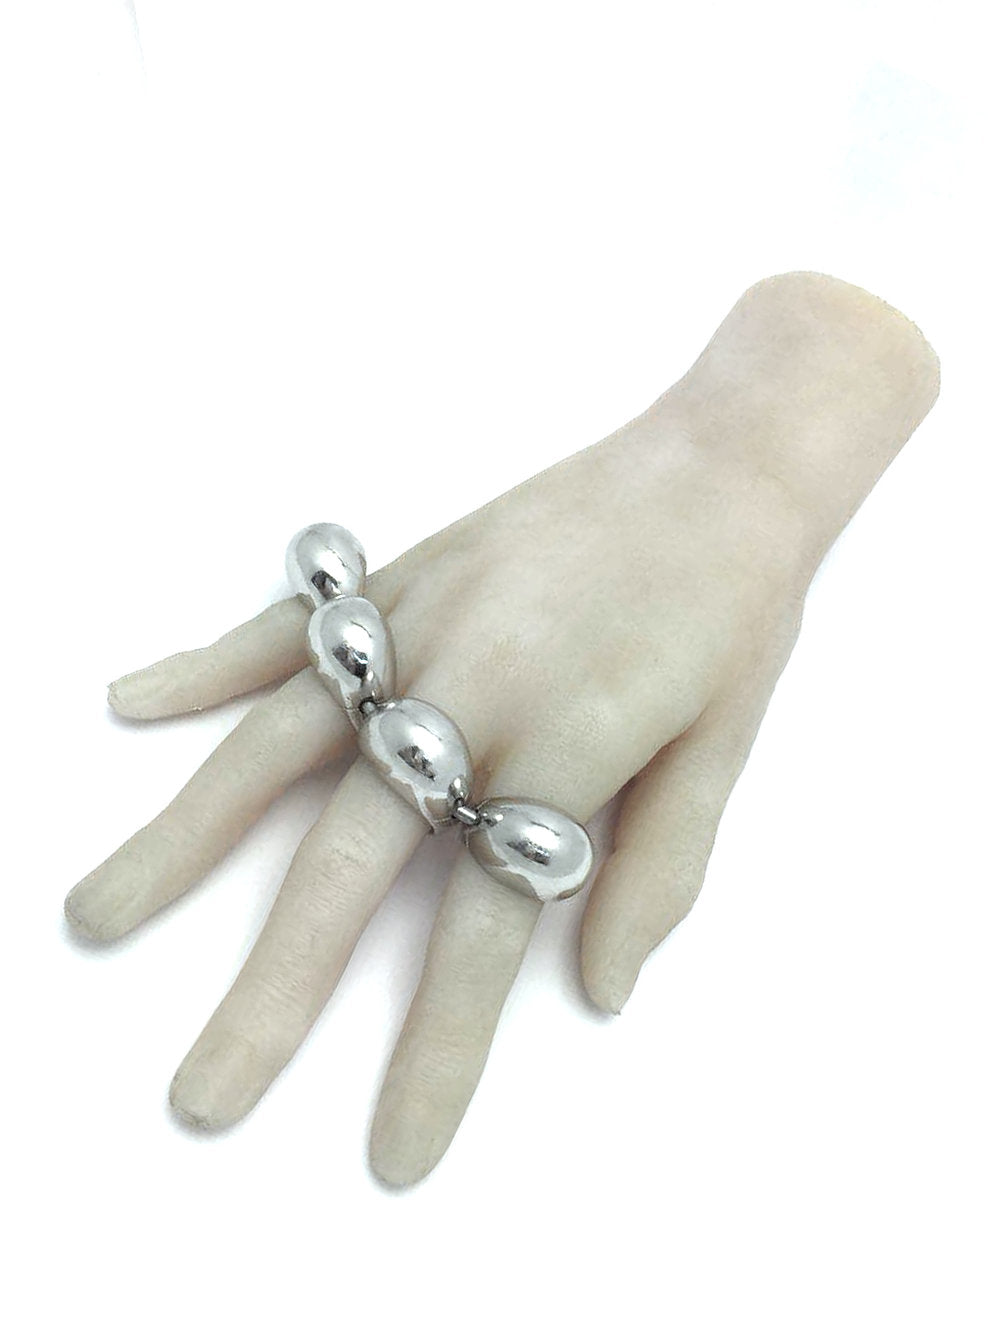 The Ball Signet Articulated Knuckleduster